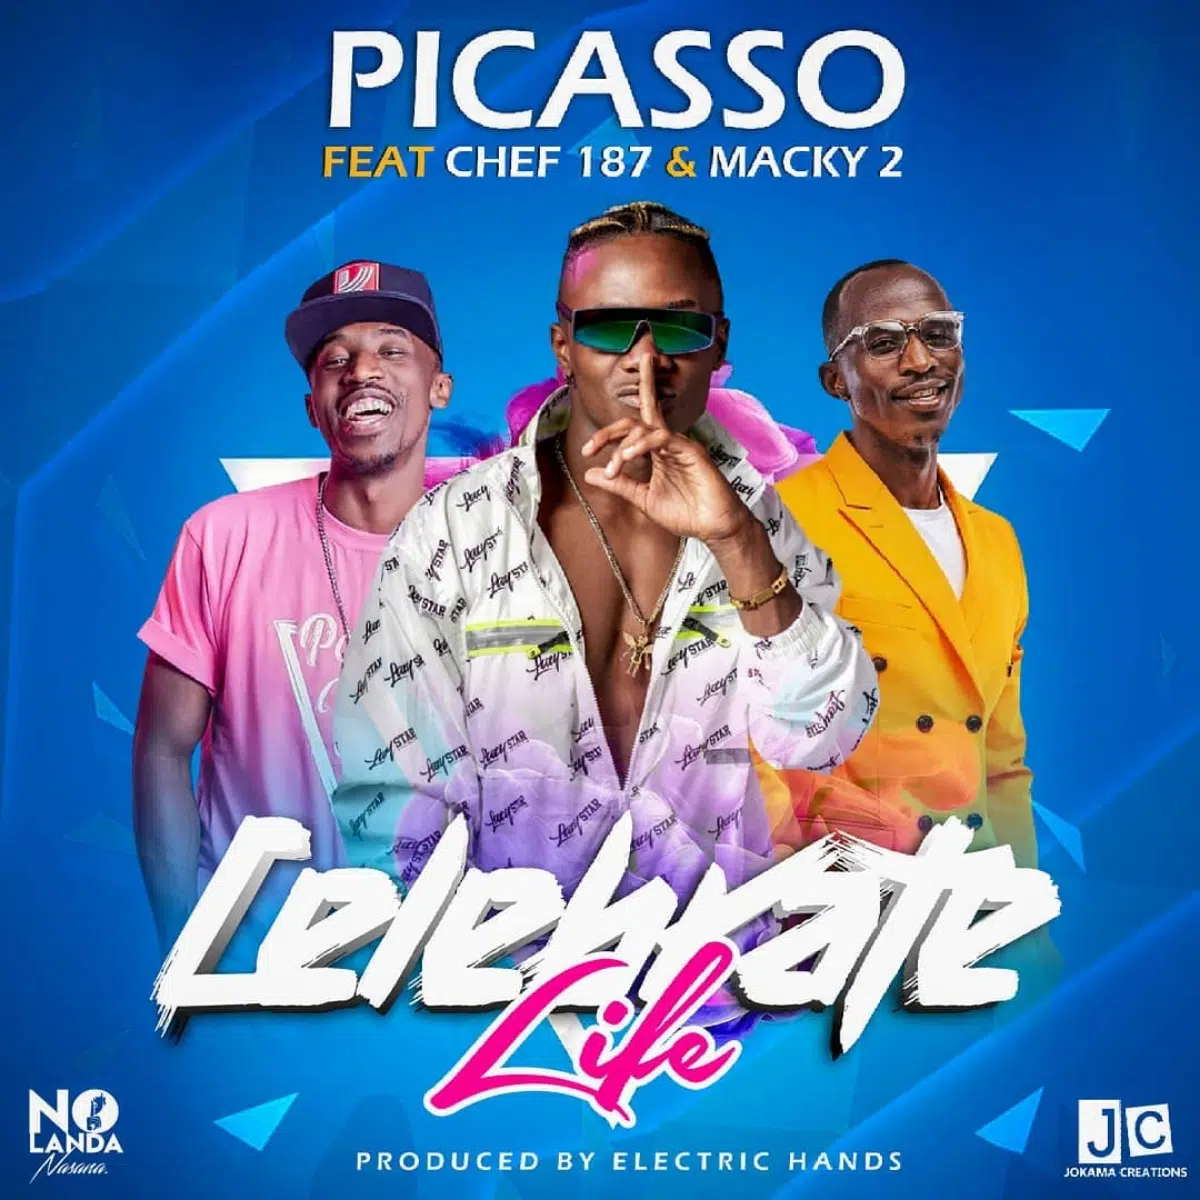 DOWNLOAD: Picasso Ft Chef 187 & Macky 2 – “Celebrate life” Mp3